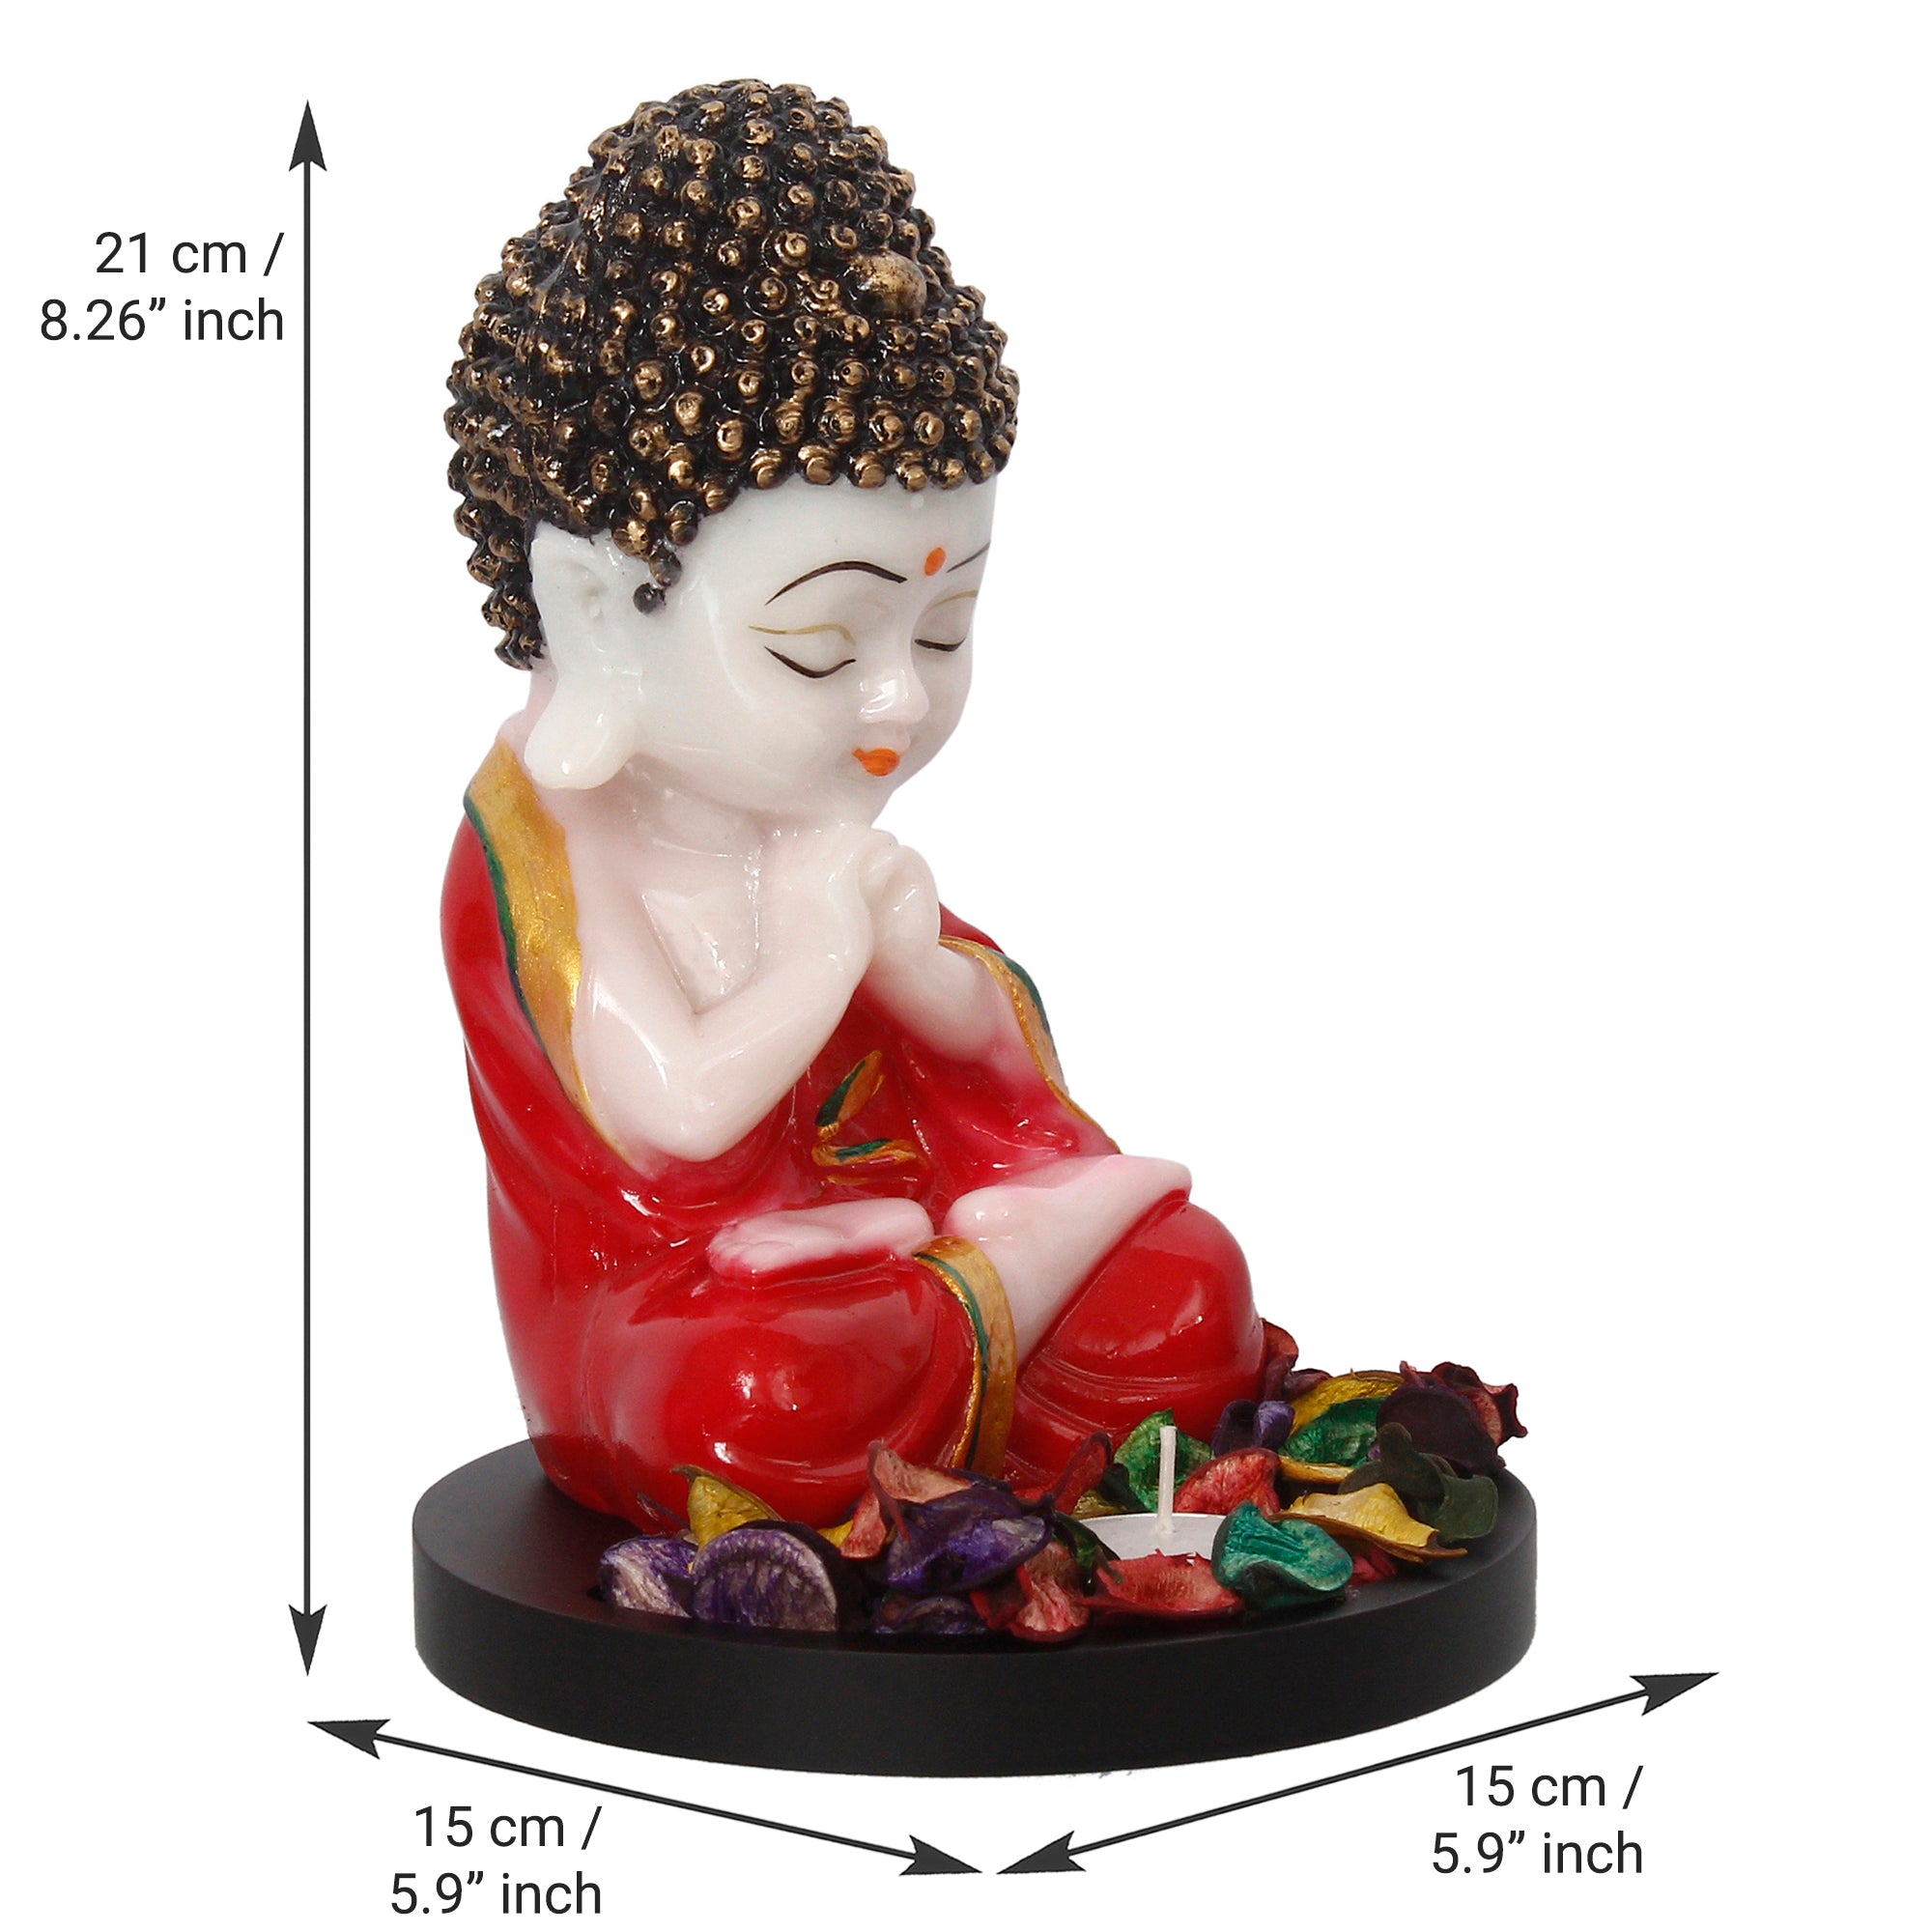 Designer Pearl Rakhi with Praying Red Monk Buddha with Wooden Base, Fragranced Petals and Tealight and Roli Chawal Pack, Best Wishes Greeting Card 3